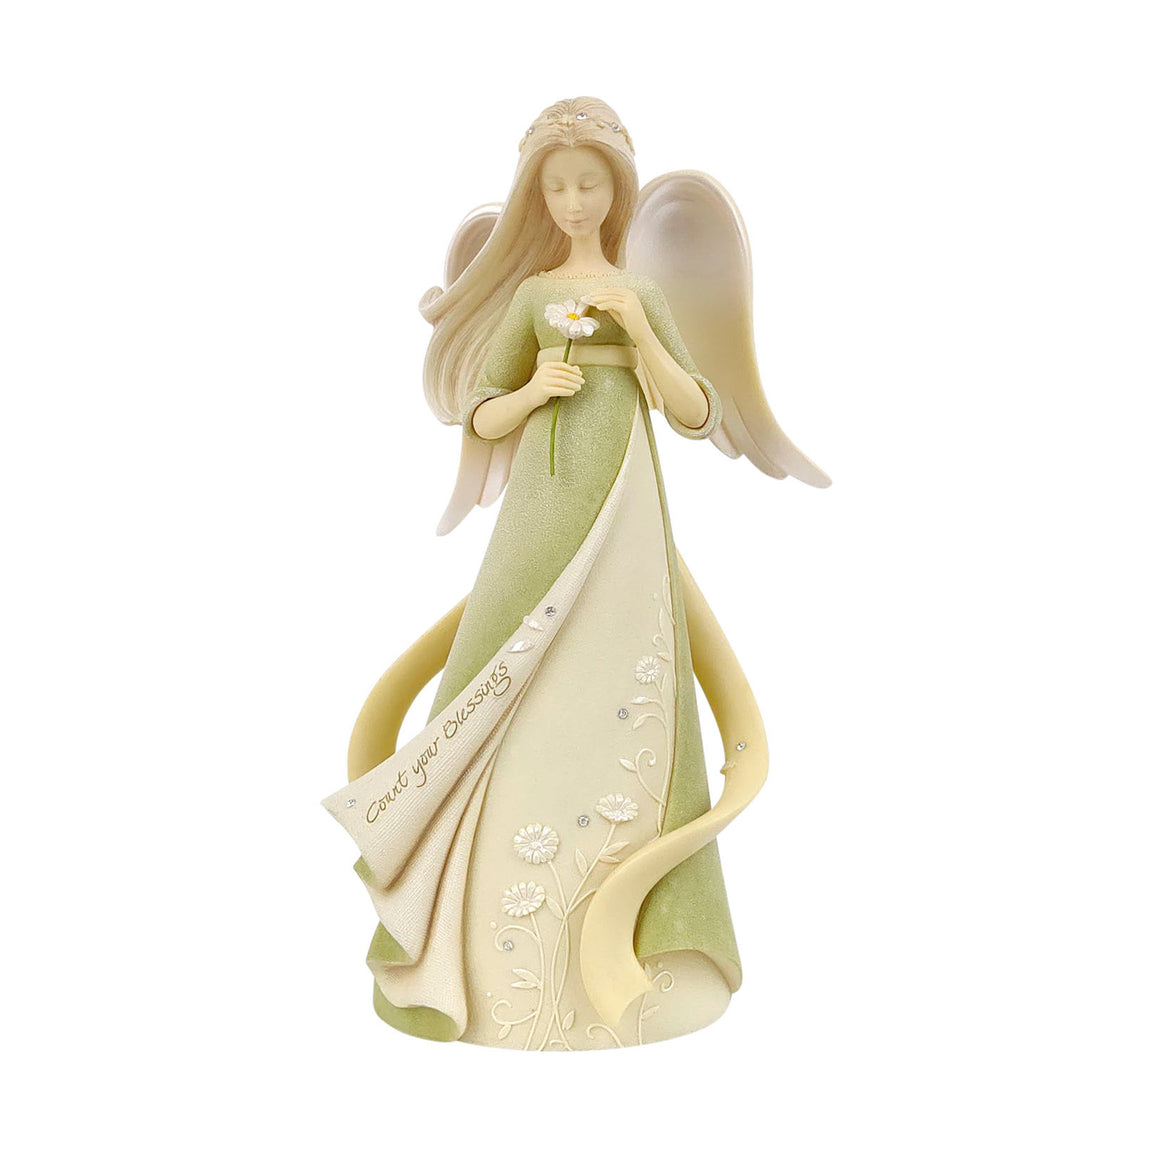 Count Your Blessings Angel Figurine from the Foundations Collection